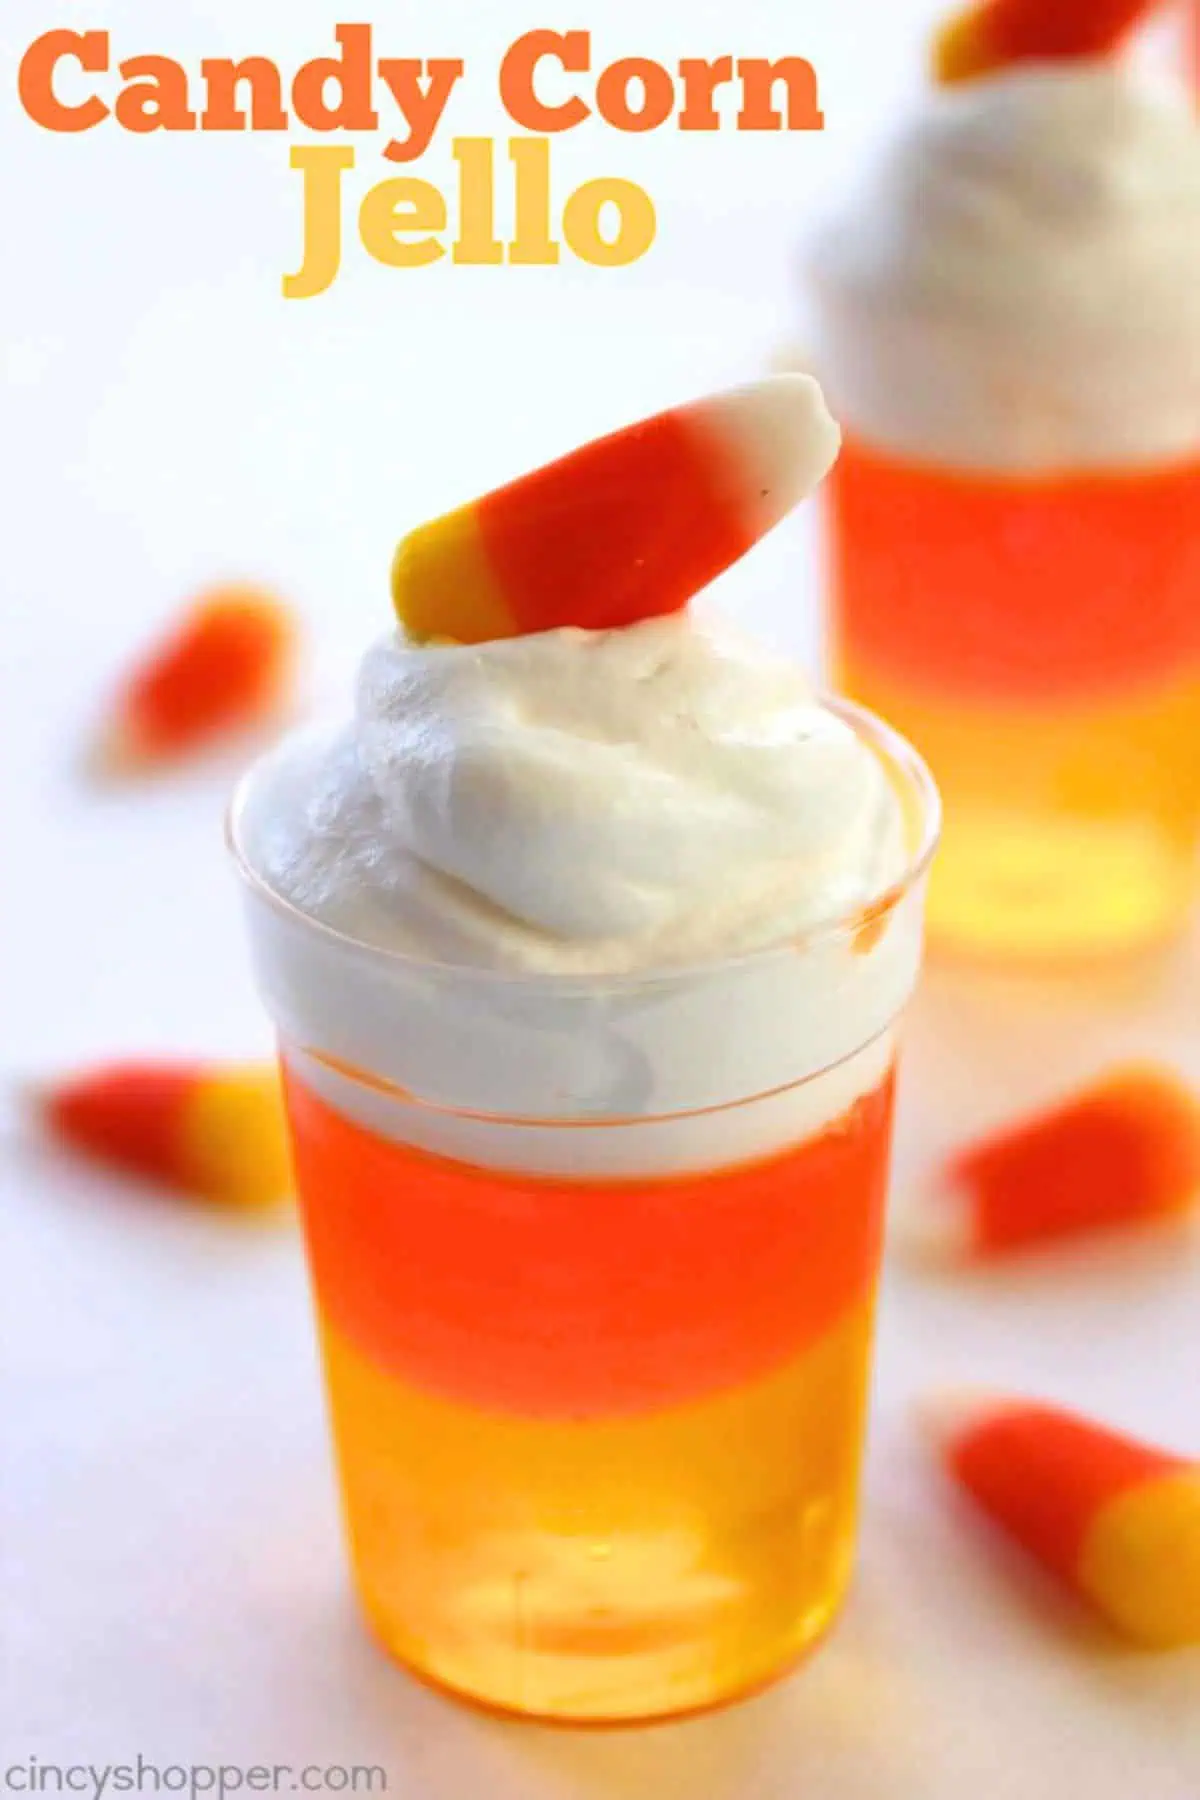 Candy corn themed jello cup with orange and yellow jello, topped with whipped cream for a delicious fall snack